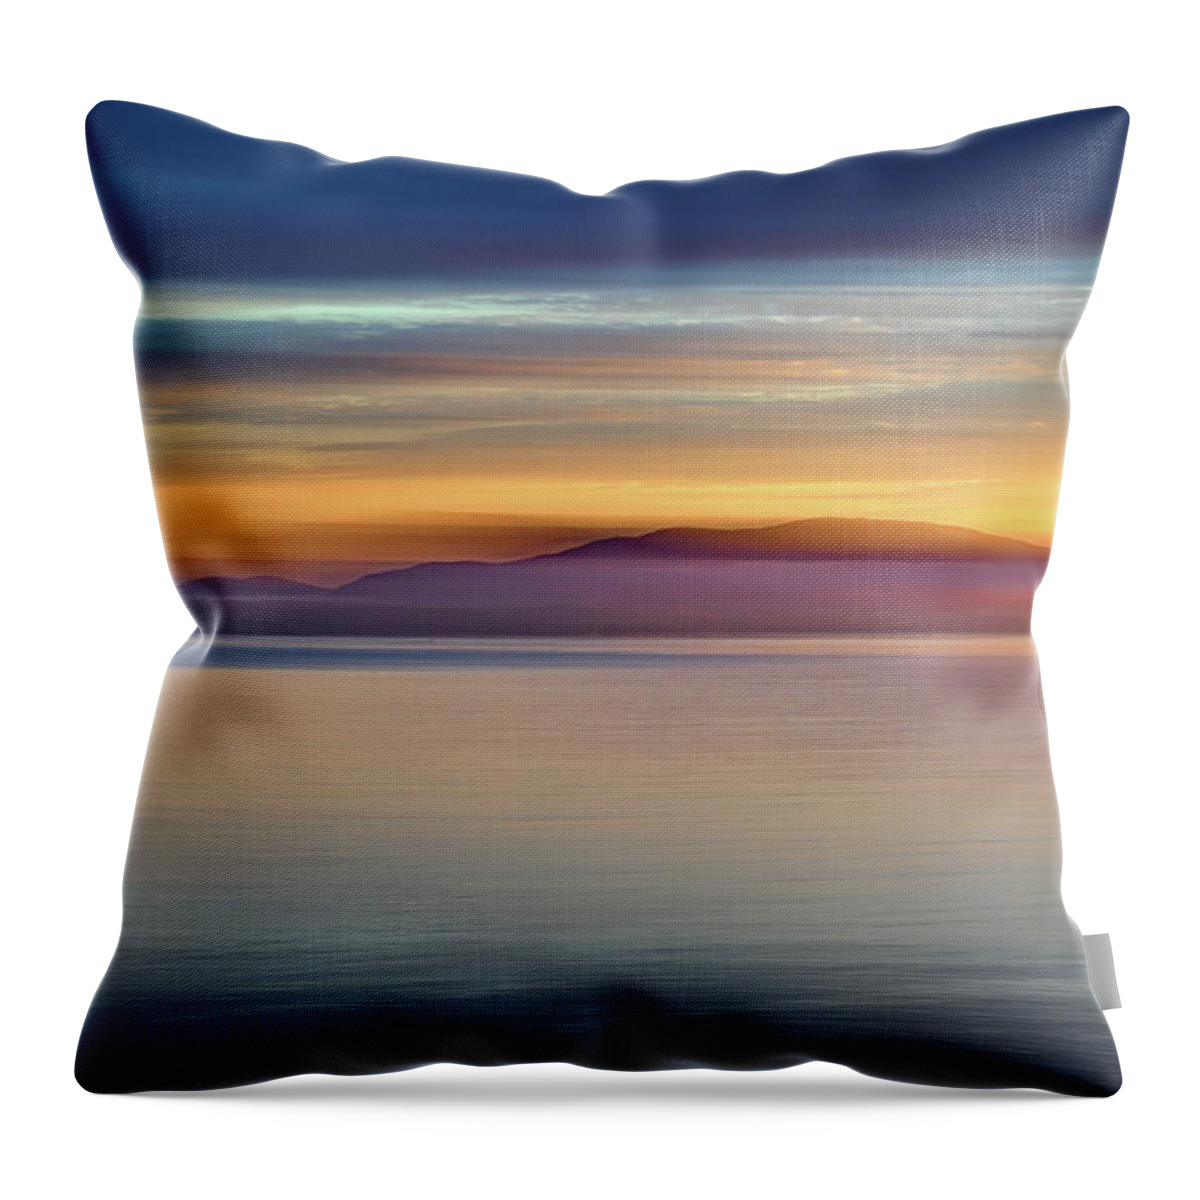 Photography Throw Pillow featuring the photograph Owls Head Abstract by Rick Berk